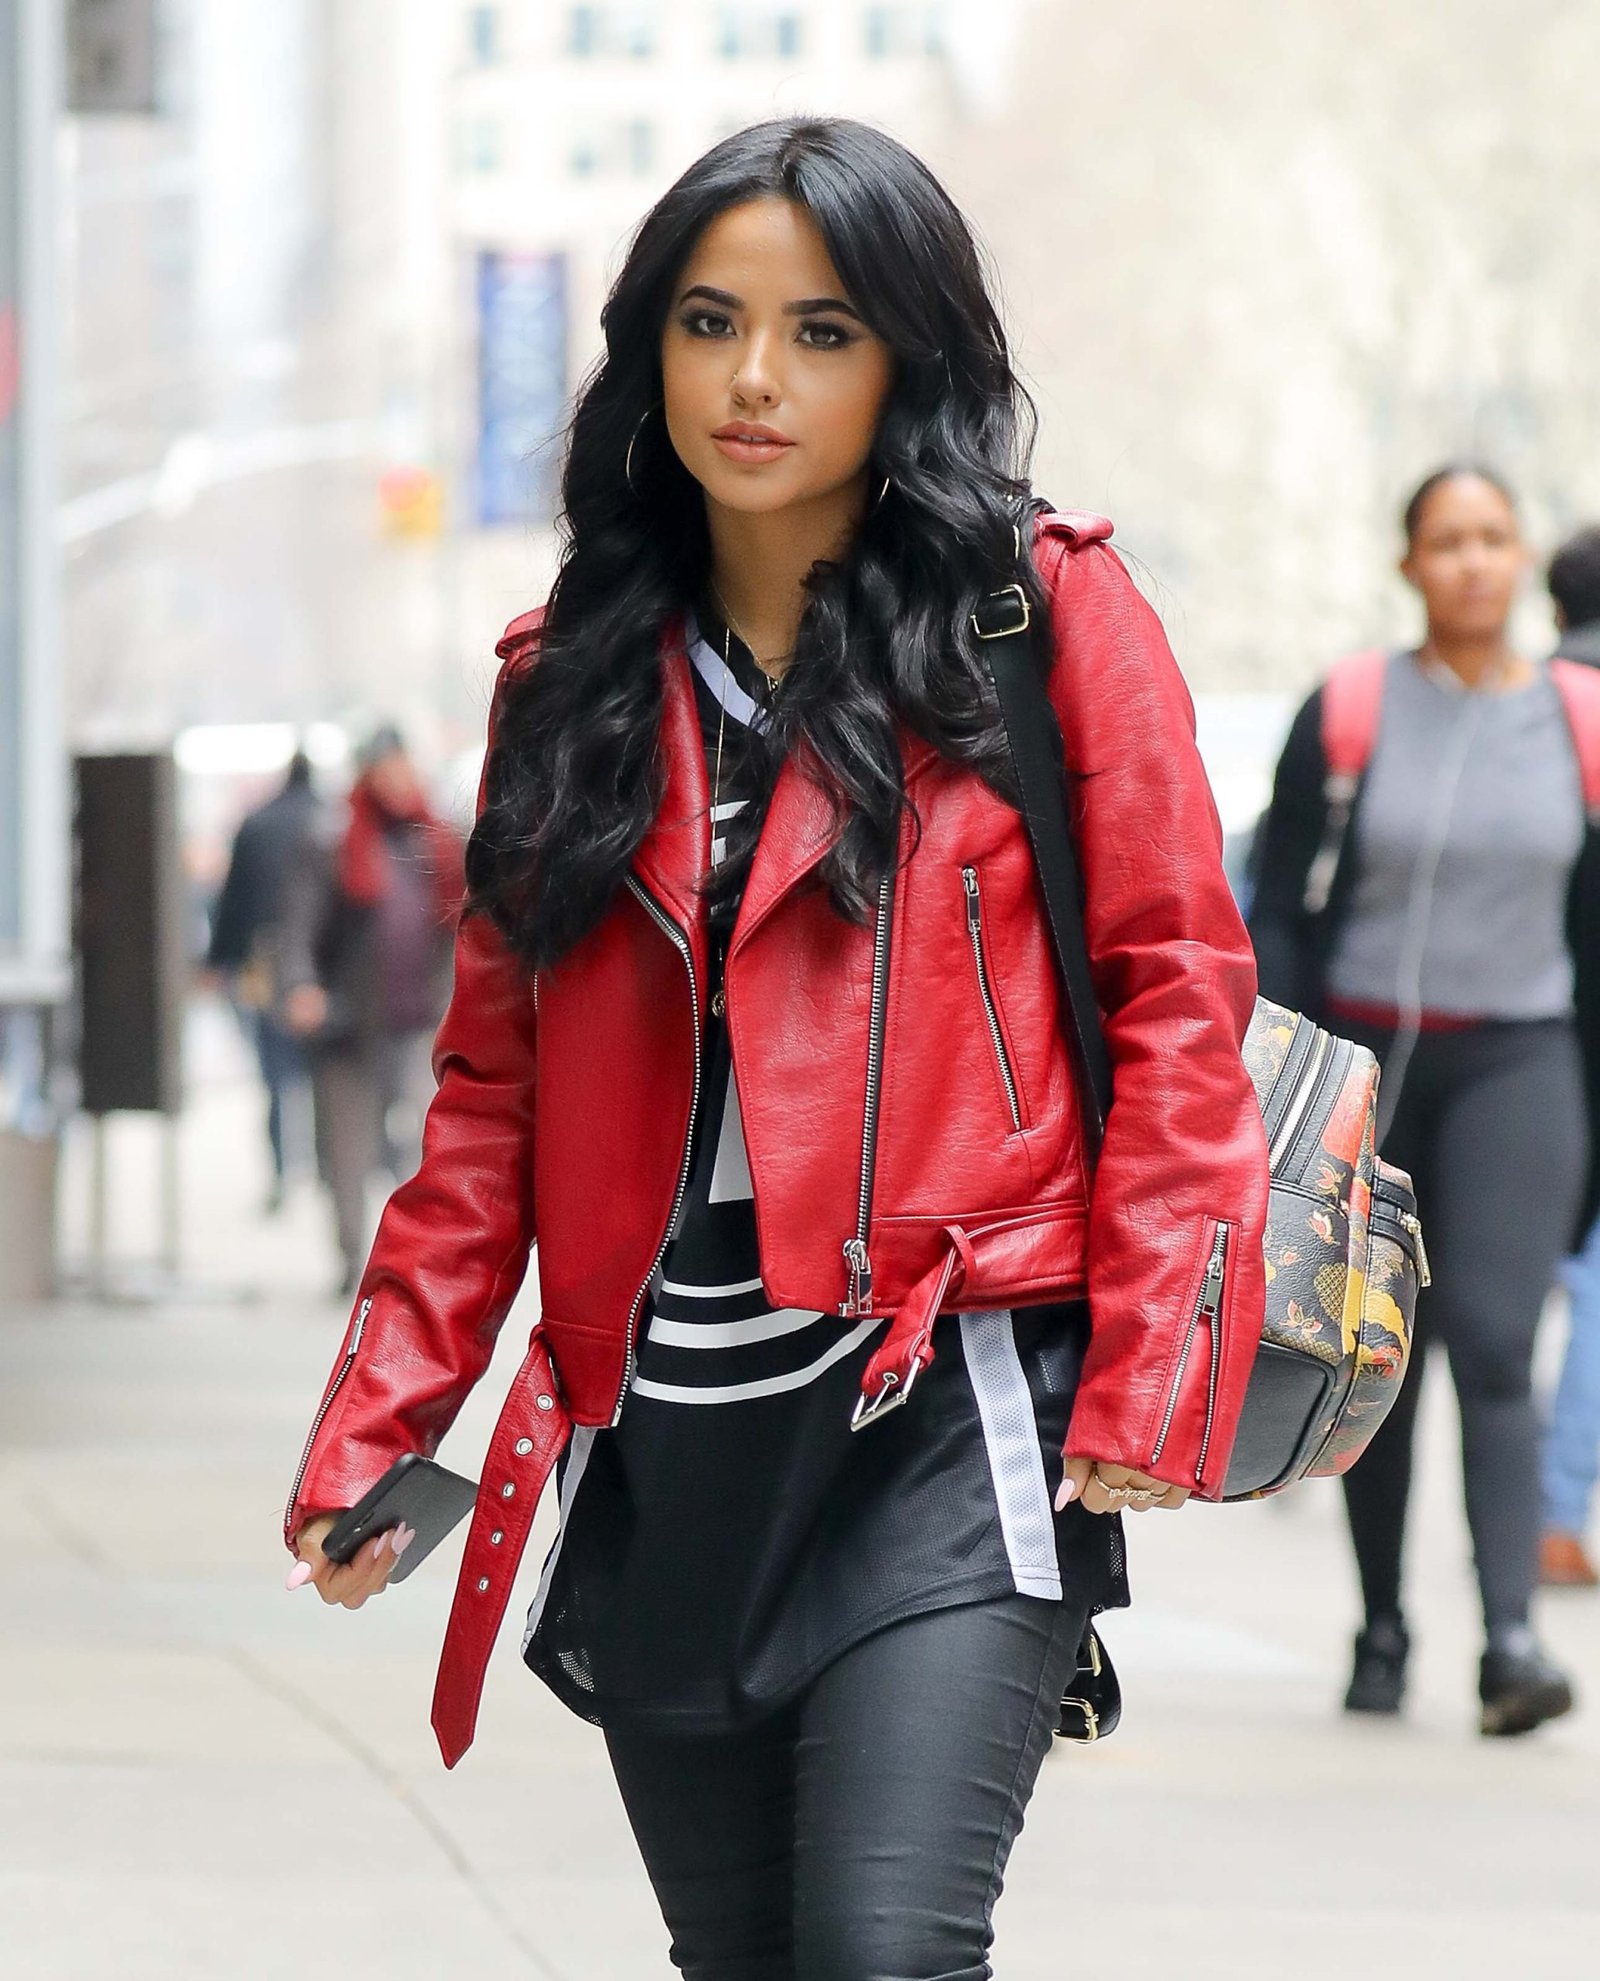 Becky G out and about in a cold day in NYC - Leather Jacket